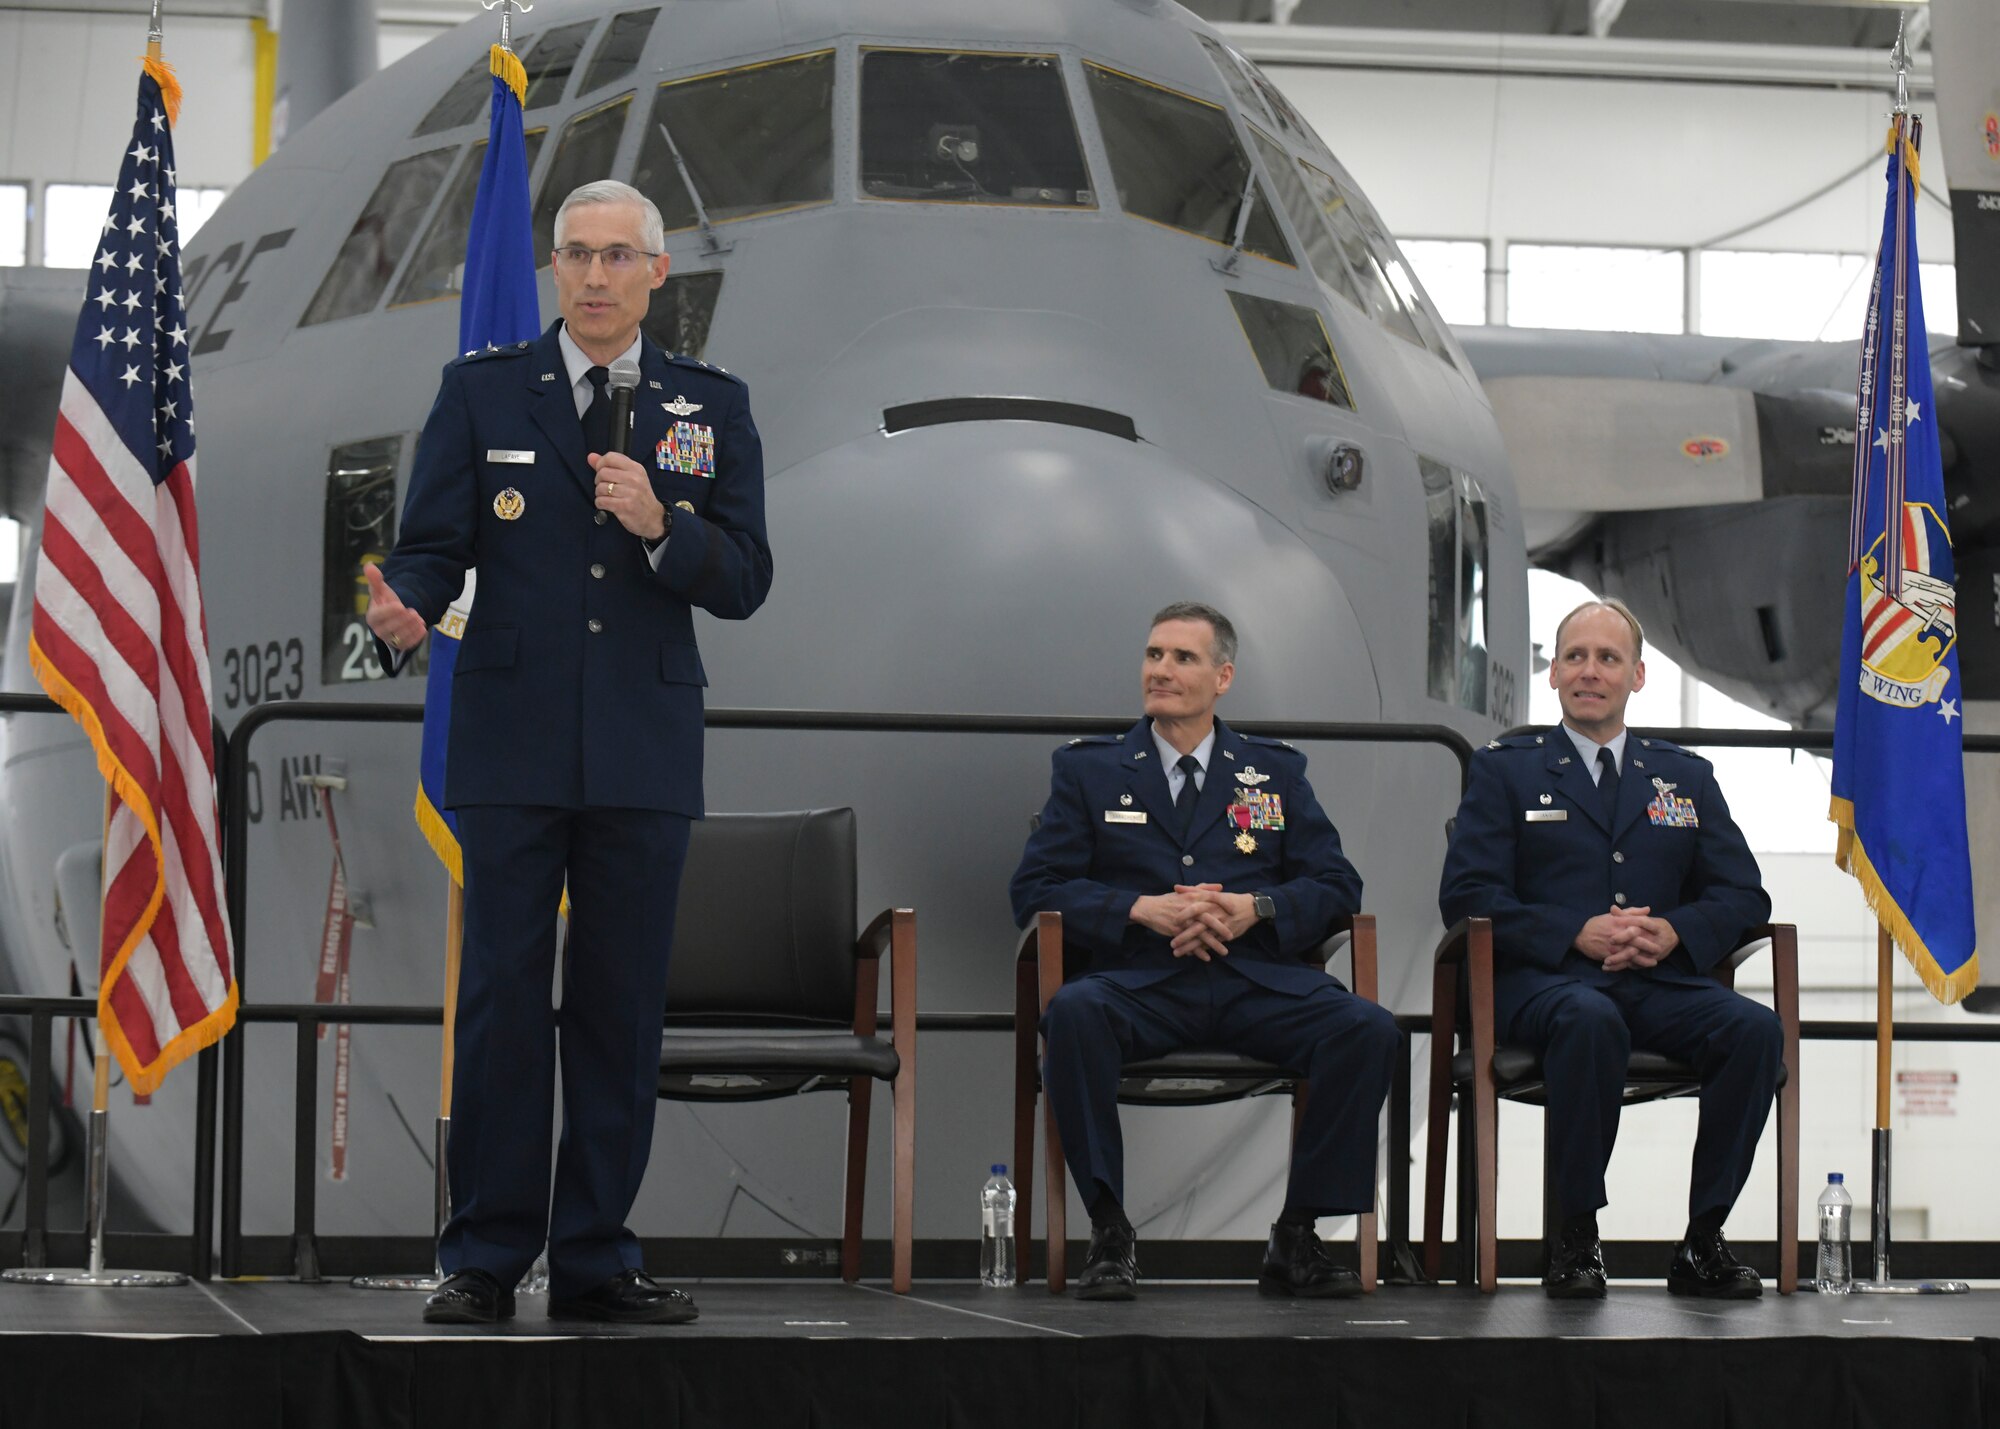 Col. Joseph Janik, Vice Commander of the 910th Airlift Wing since November, 2017, assumed command of the 910th AW during the 910th AW’s change of command ceremony on Feb. 9, 2019, at Youngstown Air Reserve Station.